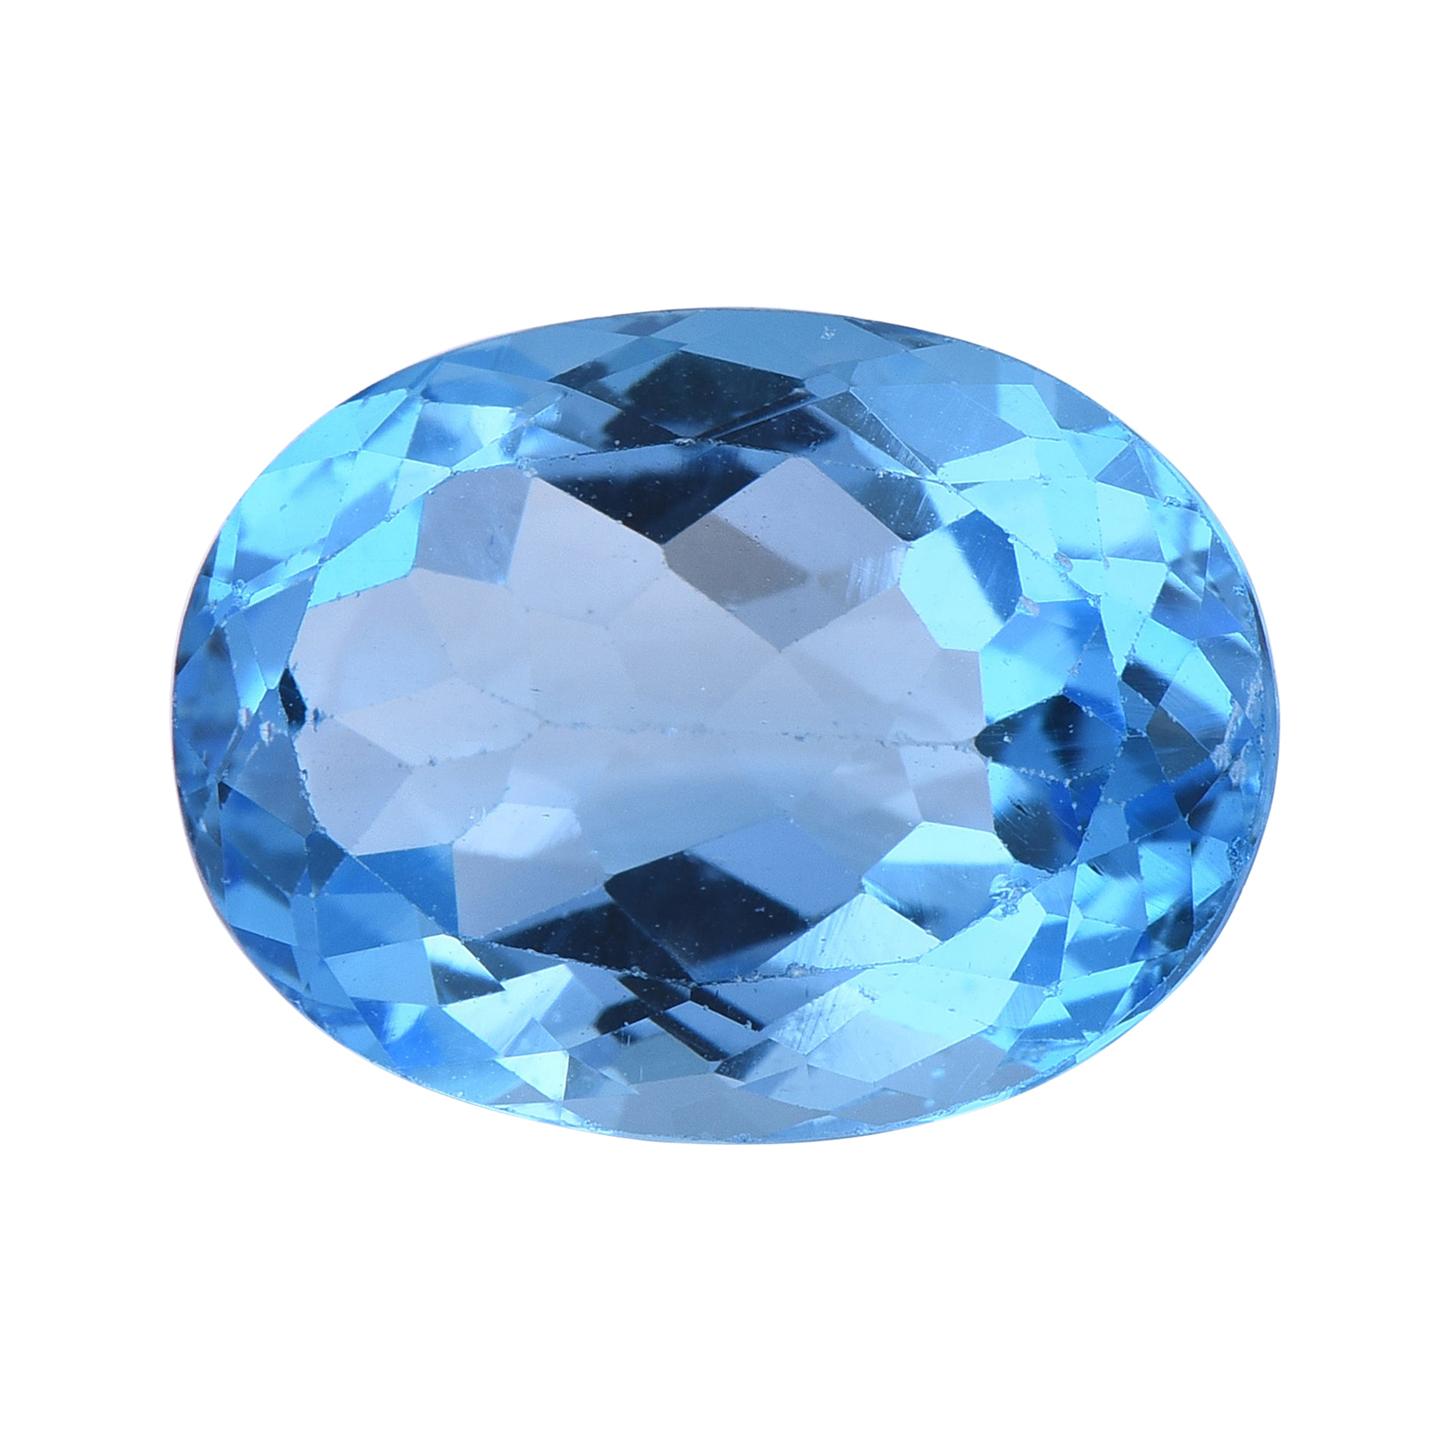 TJD Loose Natural Swiss Blue Topaz 11.59ct Oval Shape Gemstone for Any Jewellery For Sale